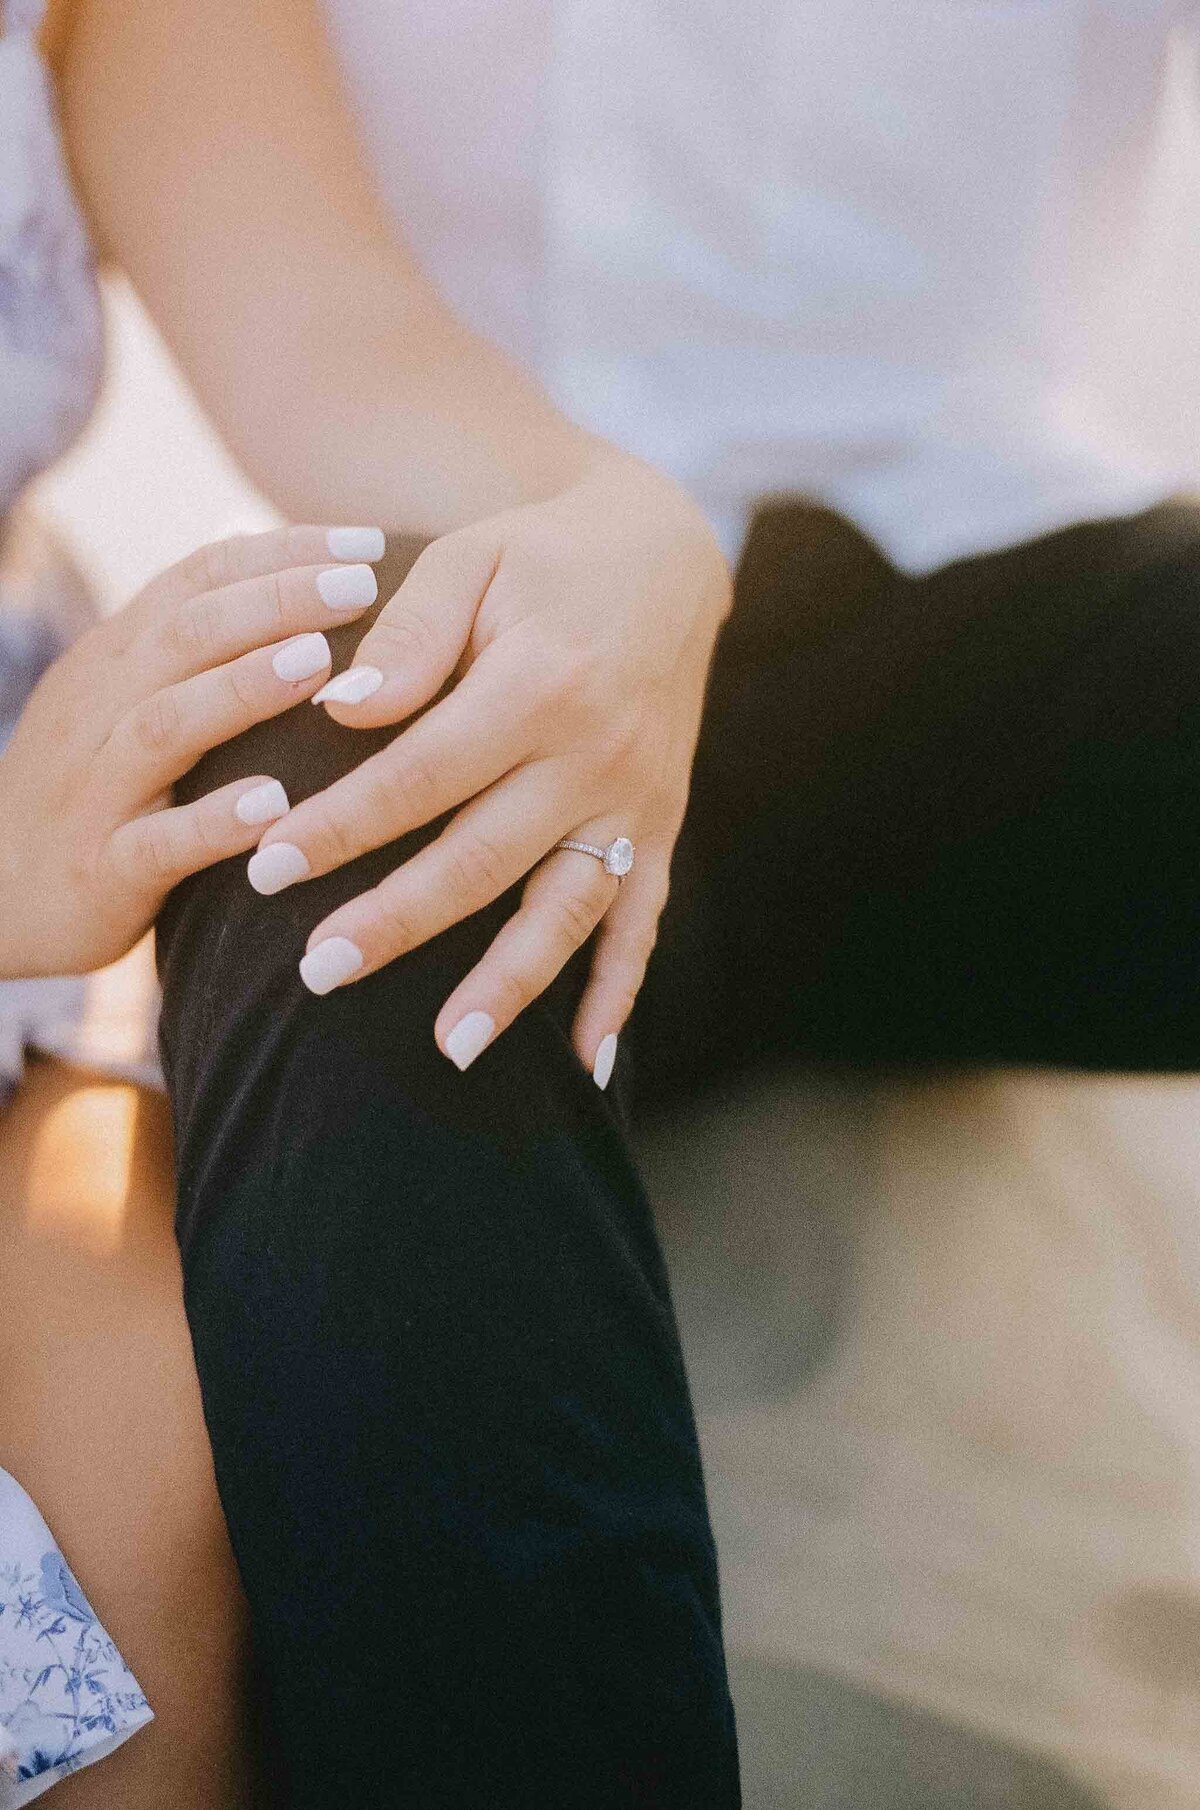 Engagement Ring Detail Shot - Beautifully Captured During Photo Session